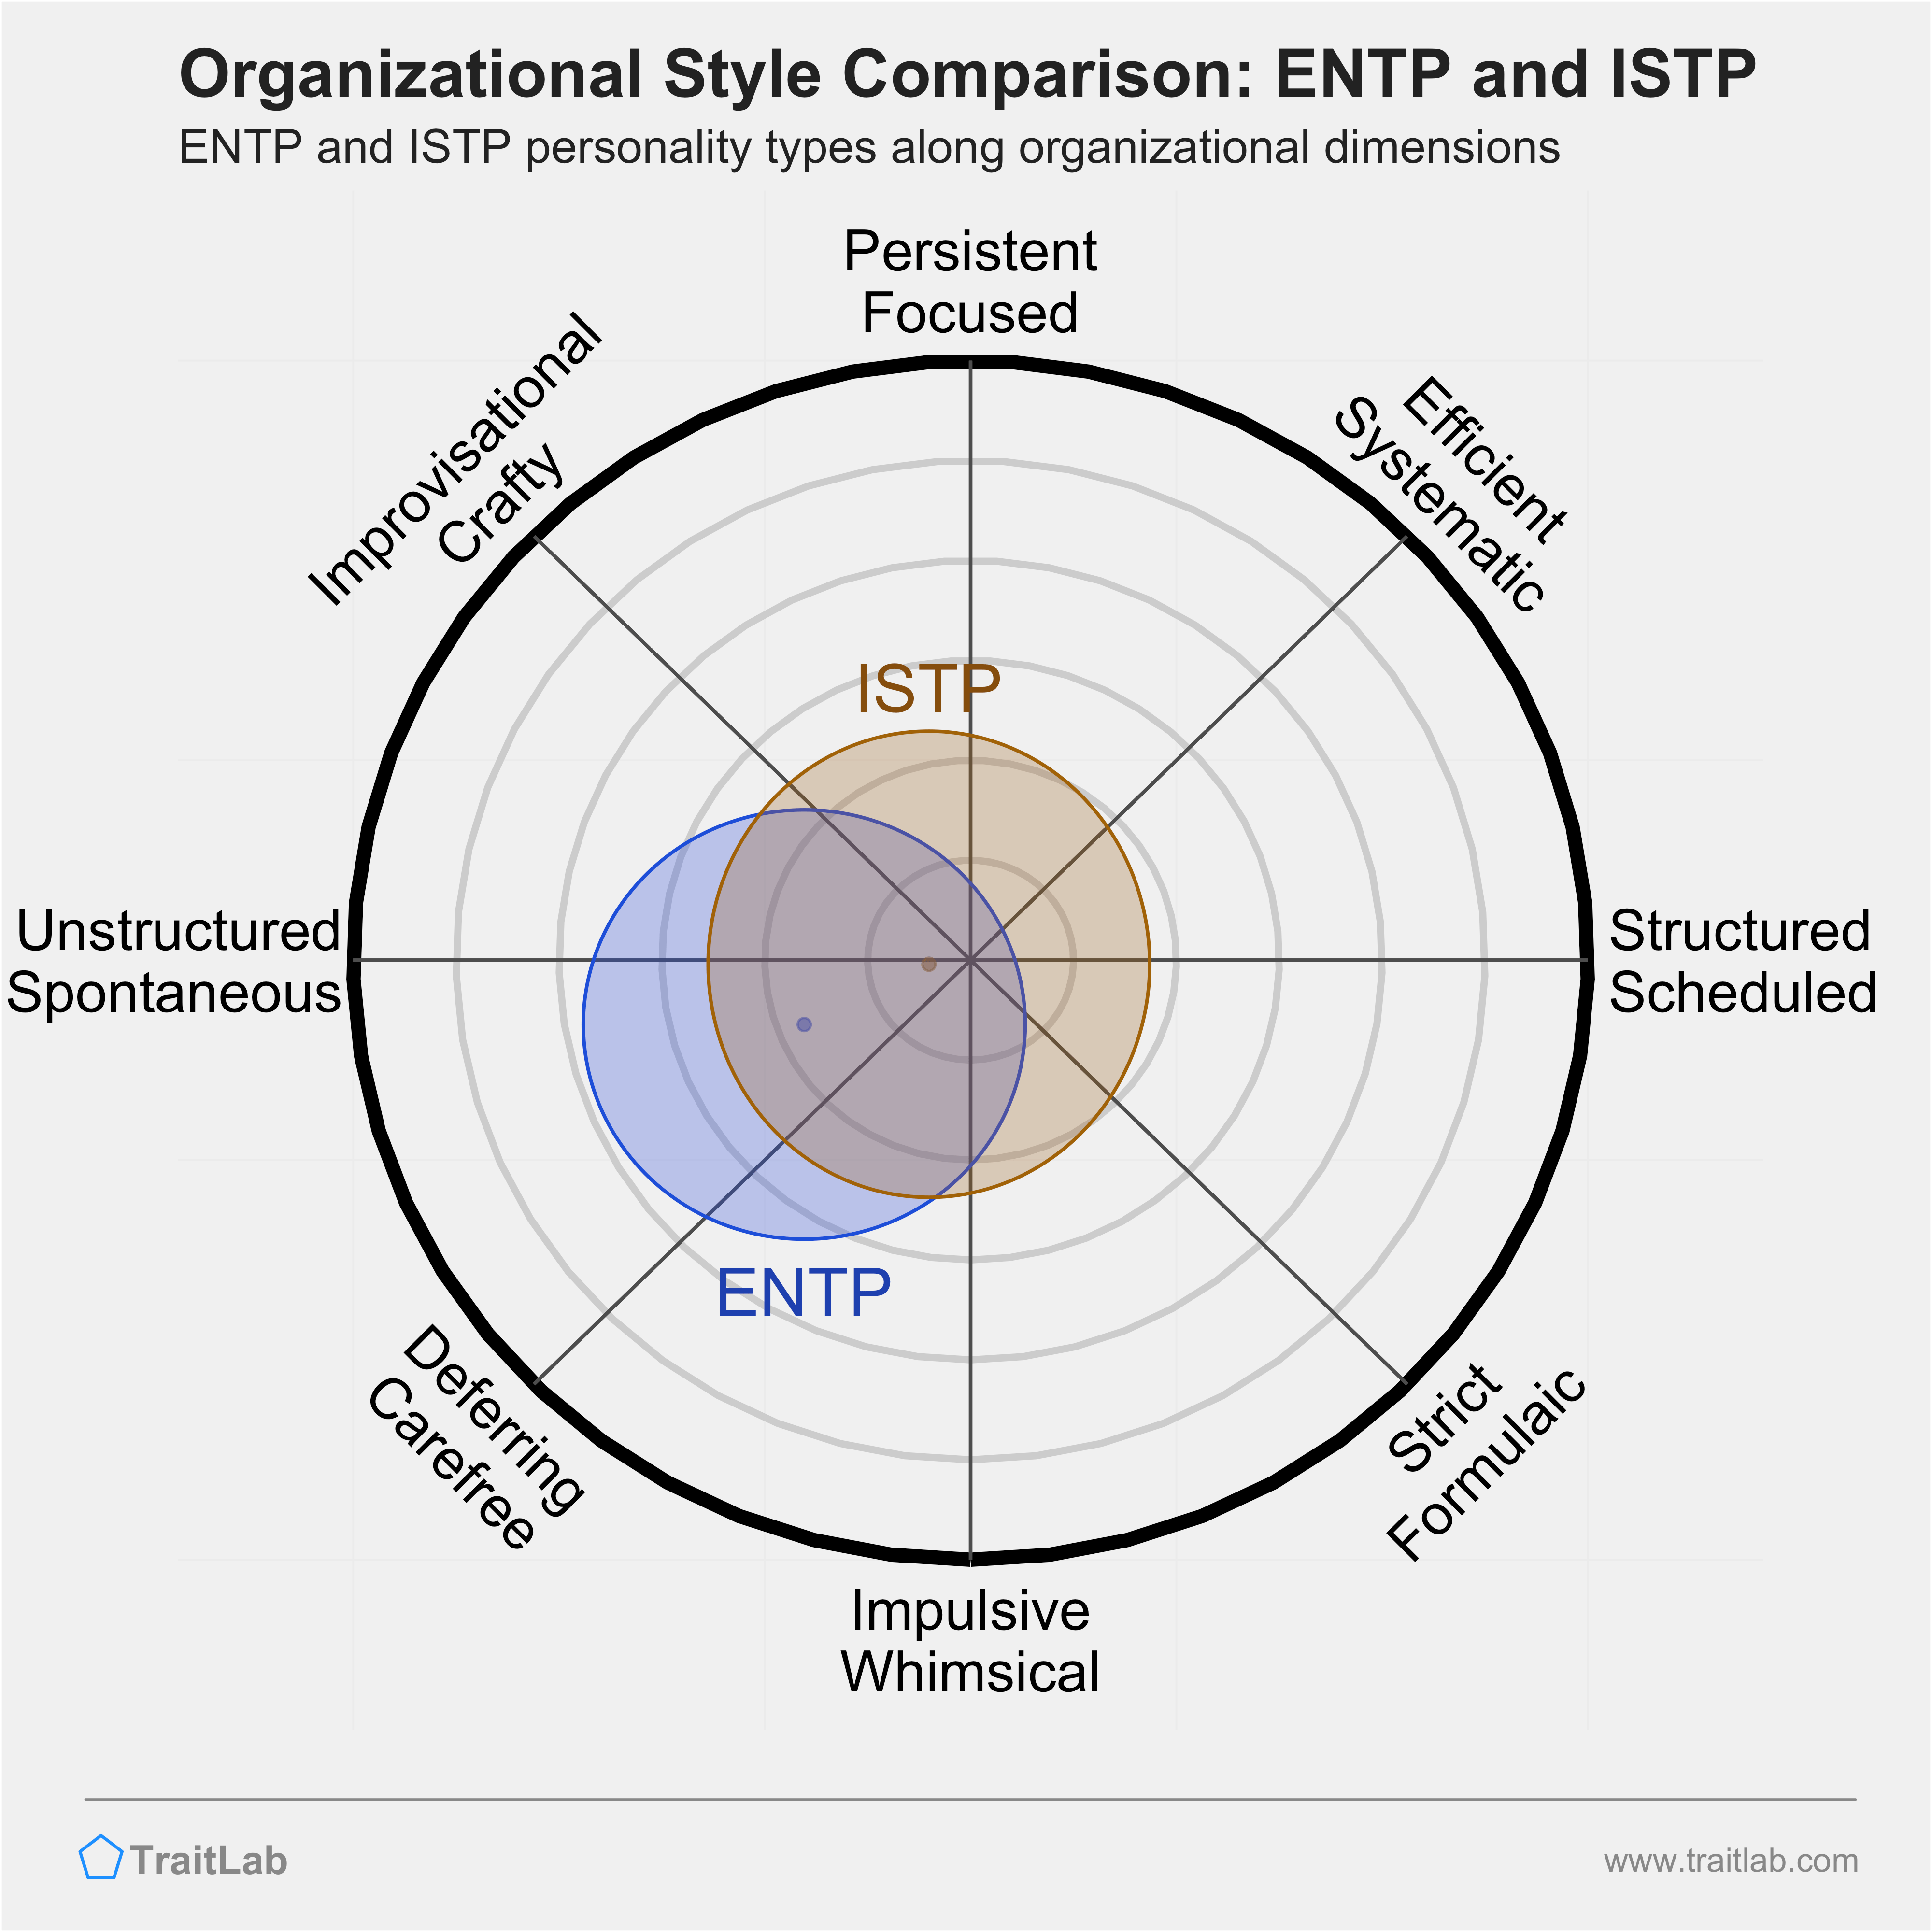 ENTP and ISTP comparison across organizational dimensions